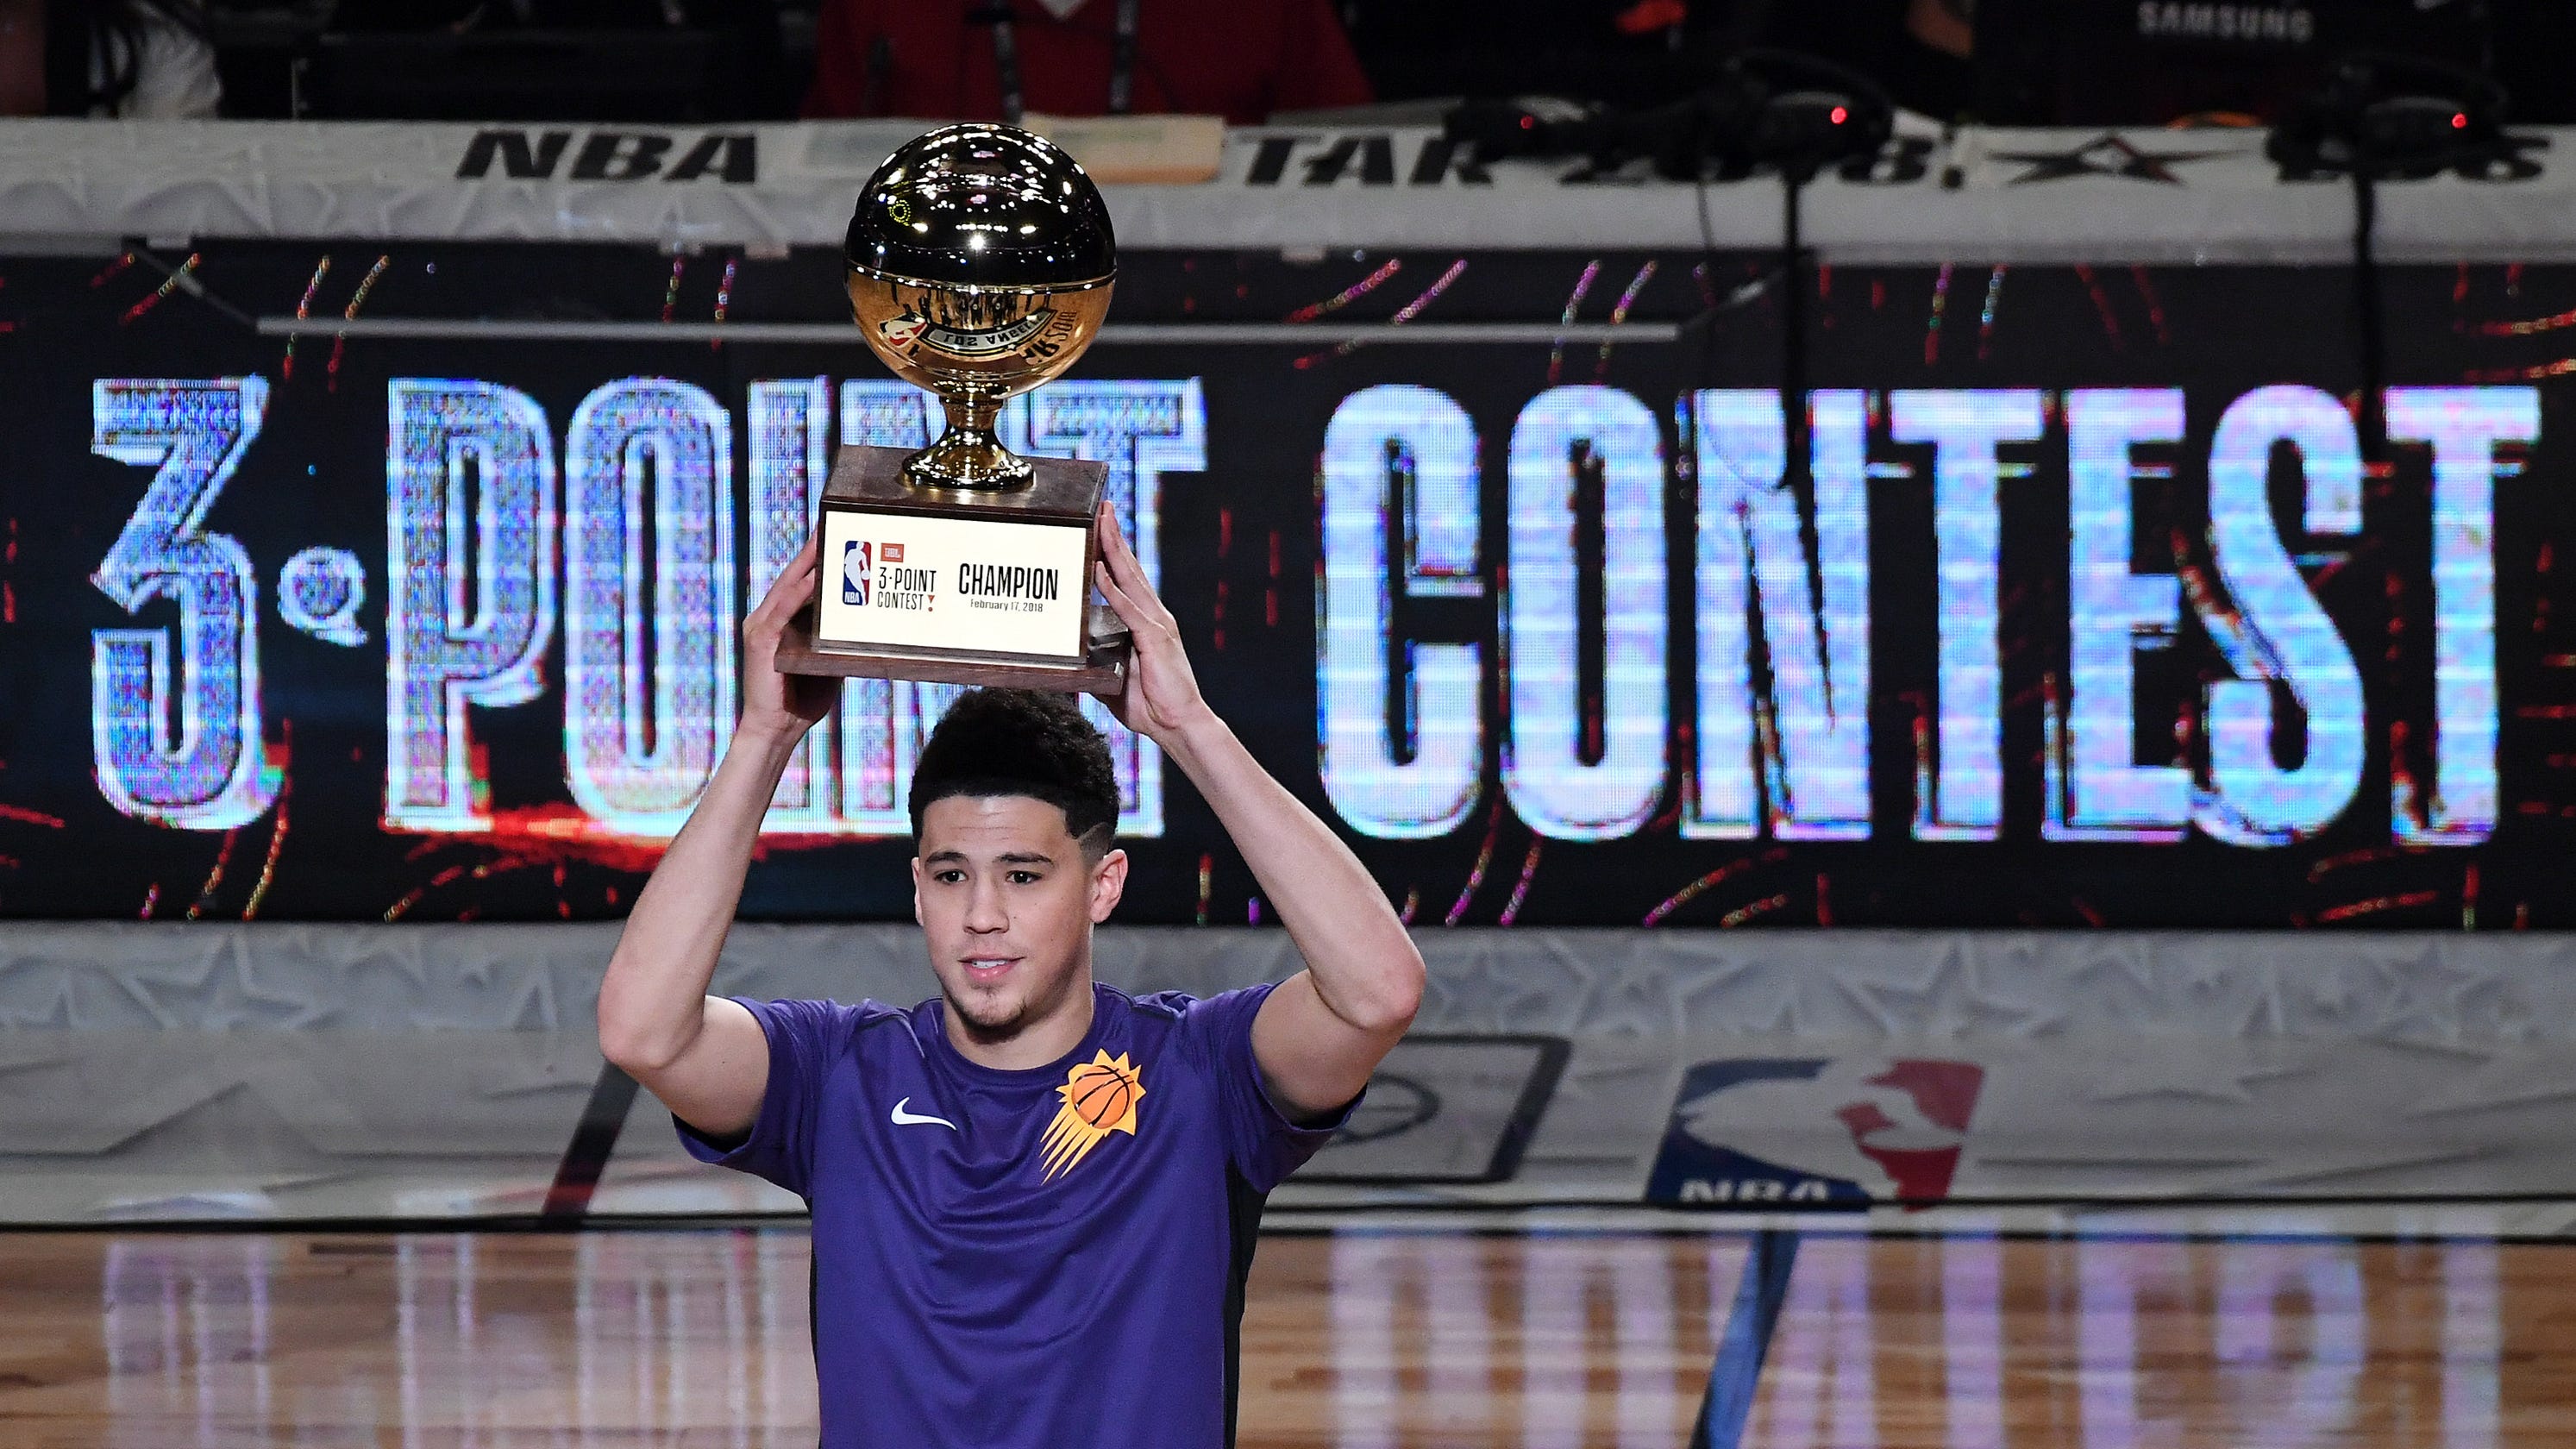 NBA 3-Point Contest: Devin Booker to defend title vs. Curry brothers2987 x 1680